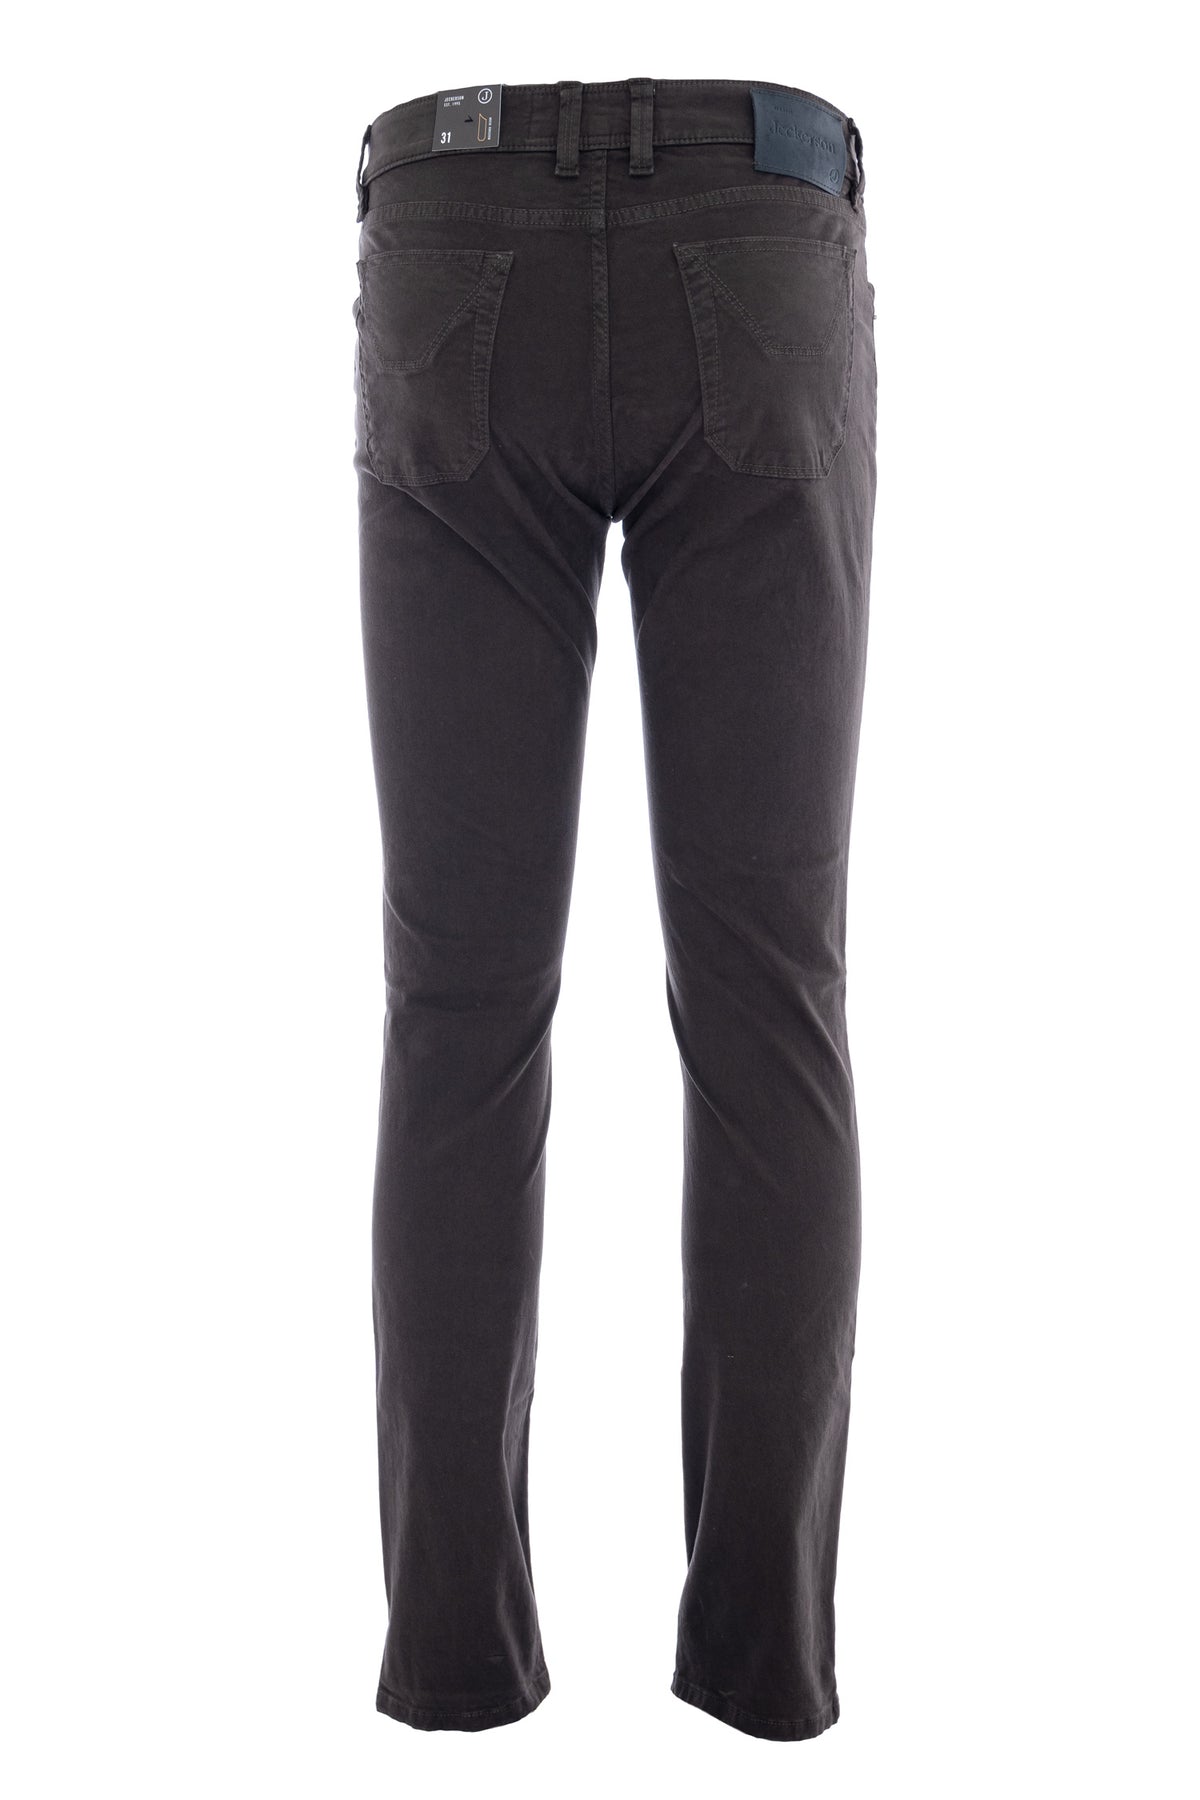 Gray Five-Pocket Trousers